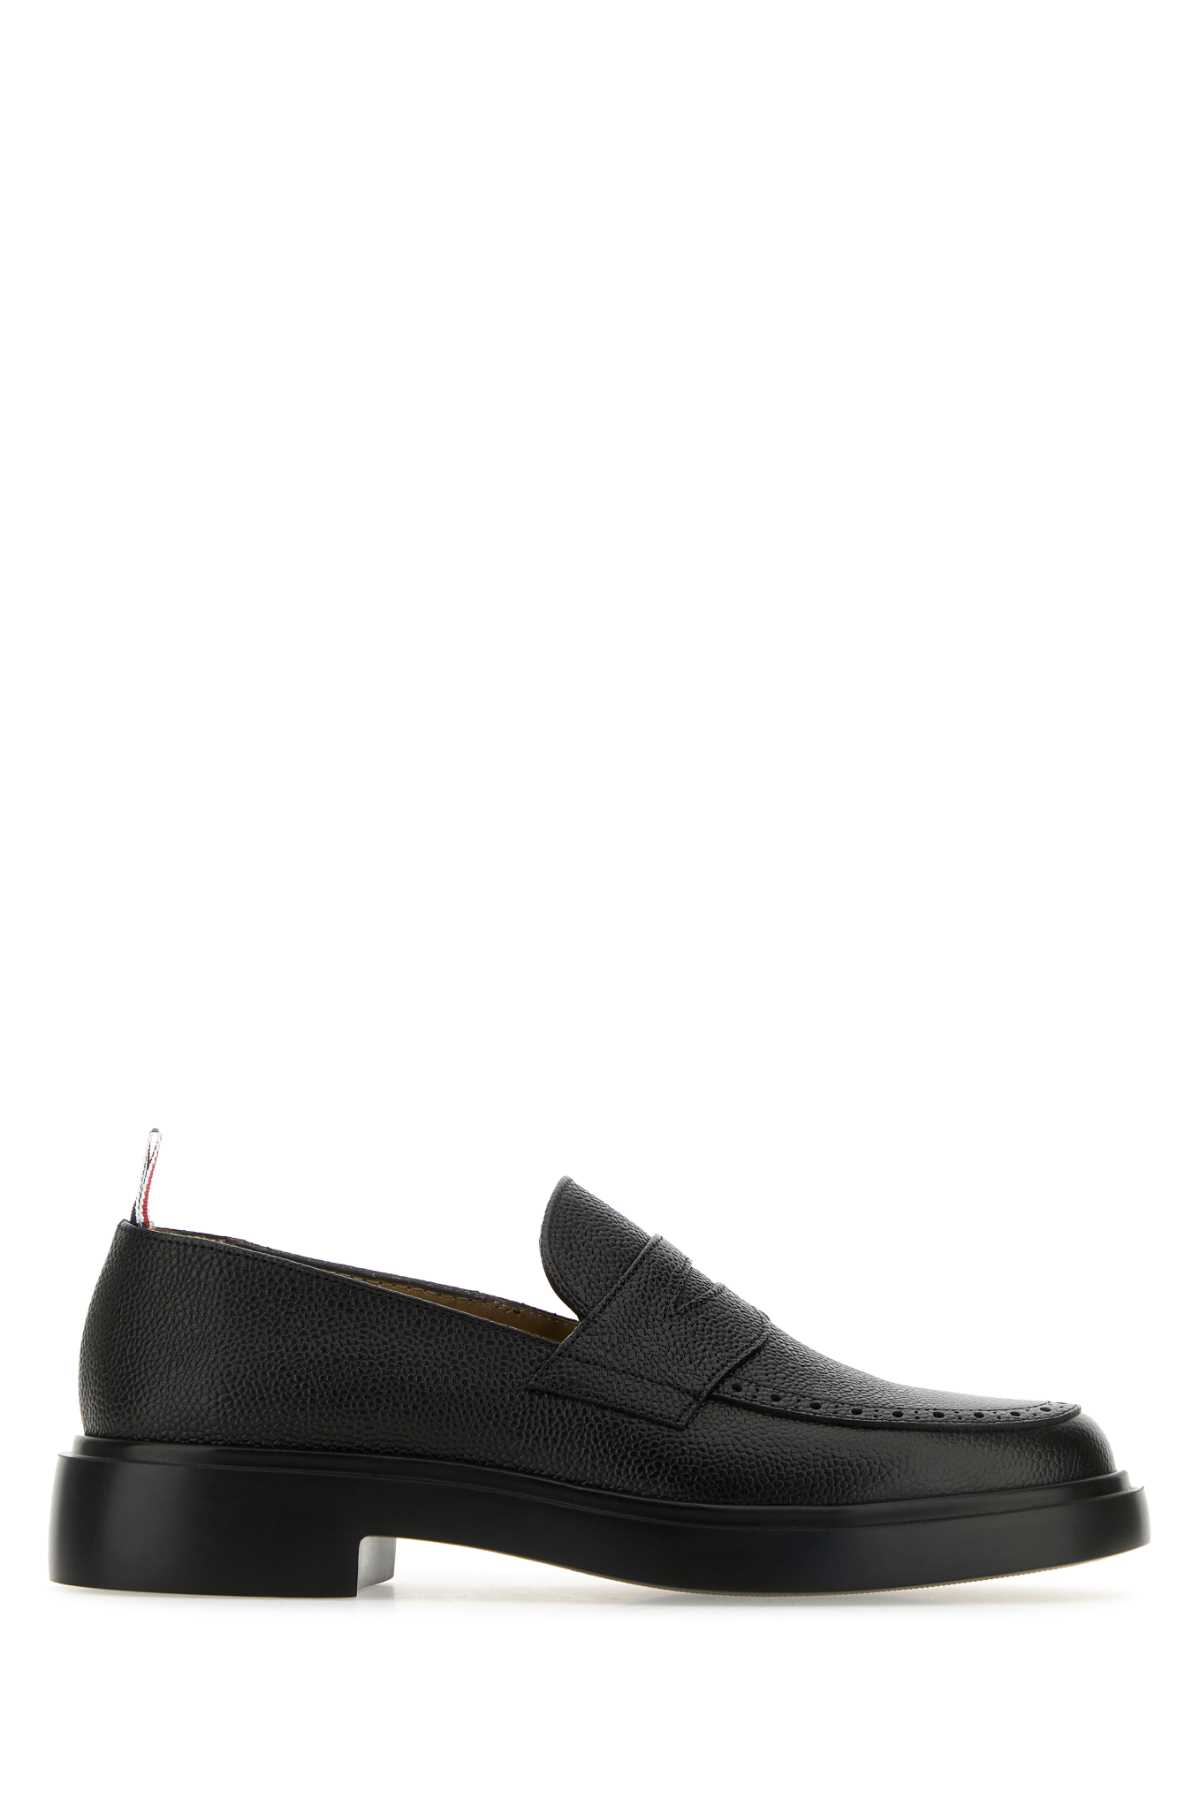 Shop Thom Browne Black Leather Penny Loafers